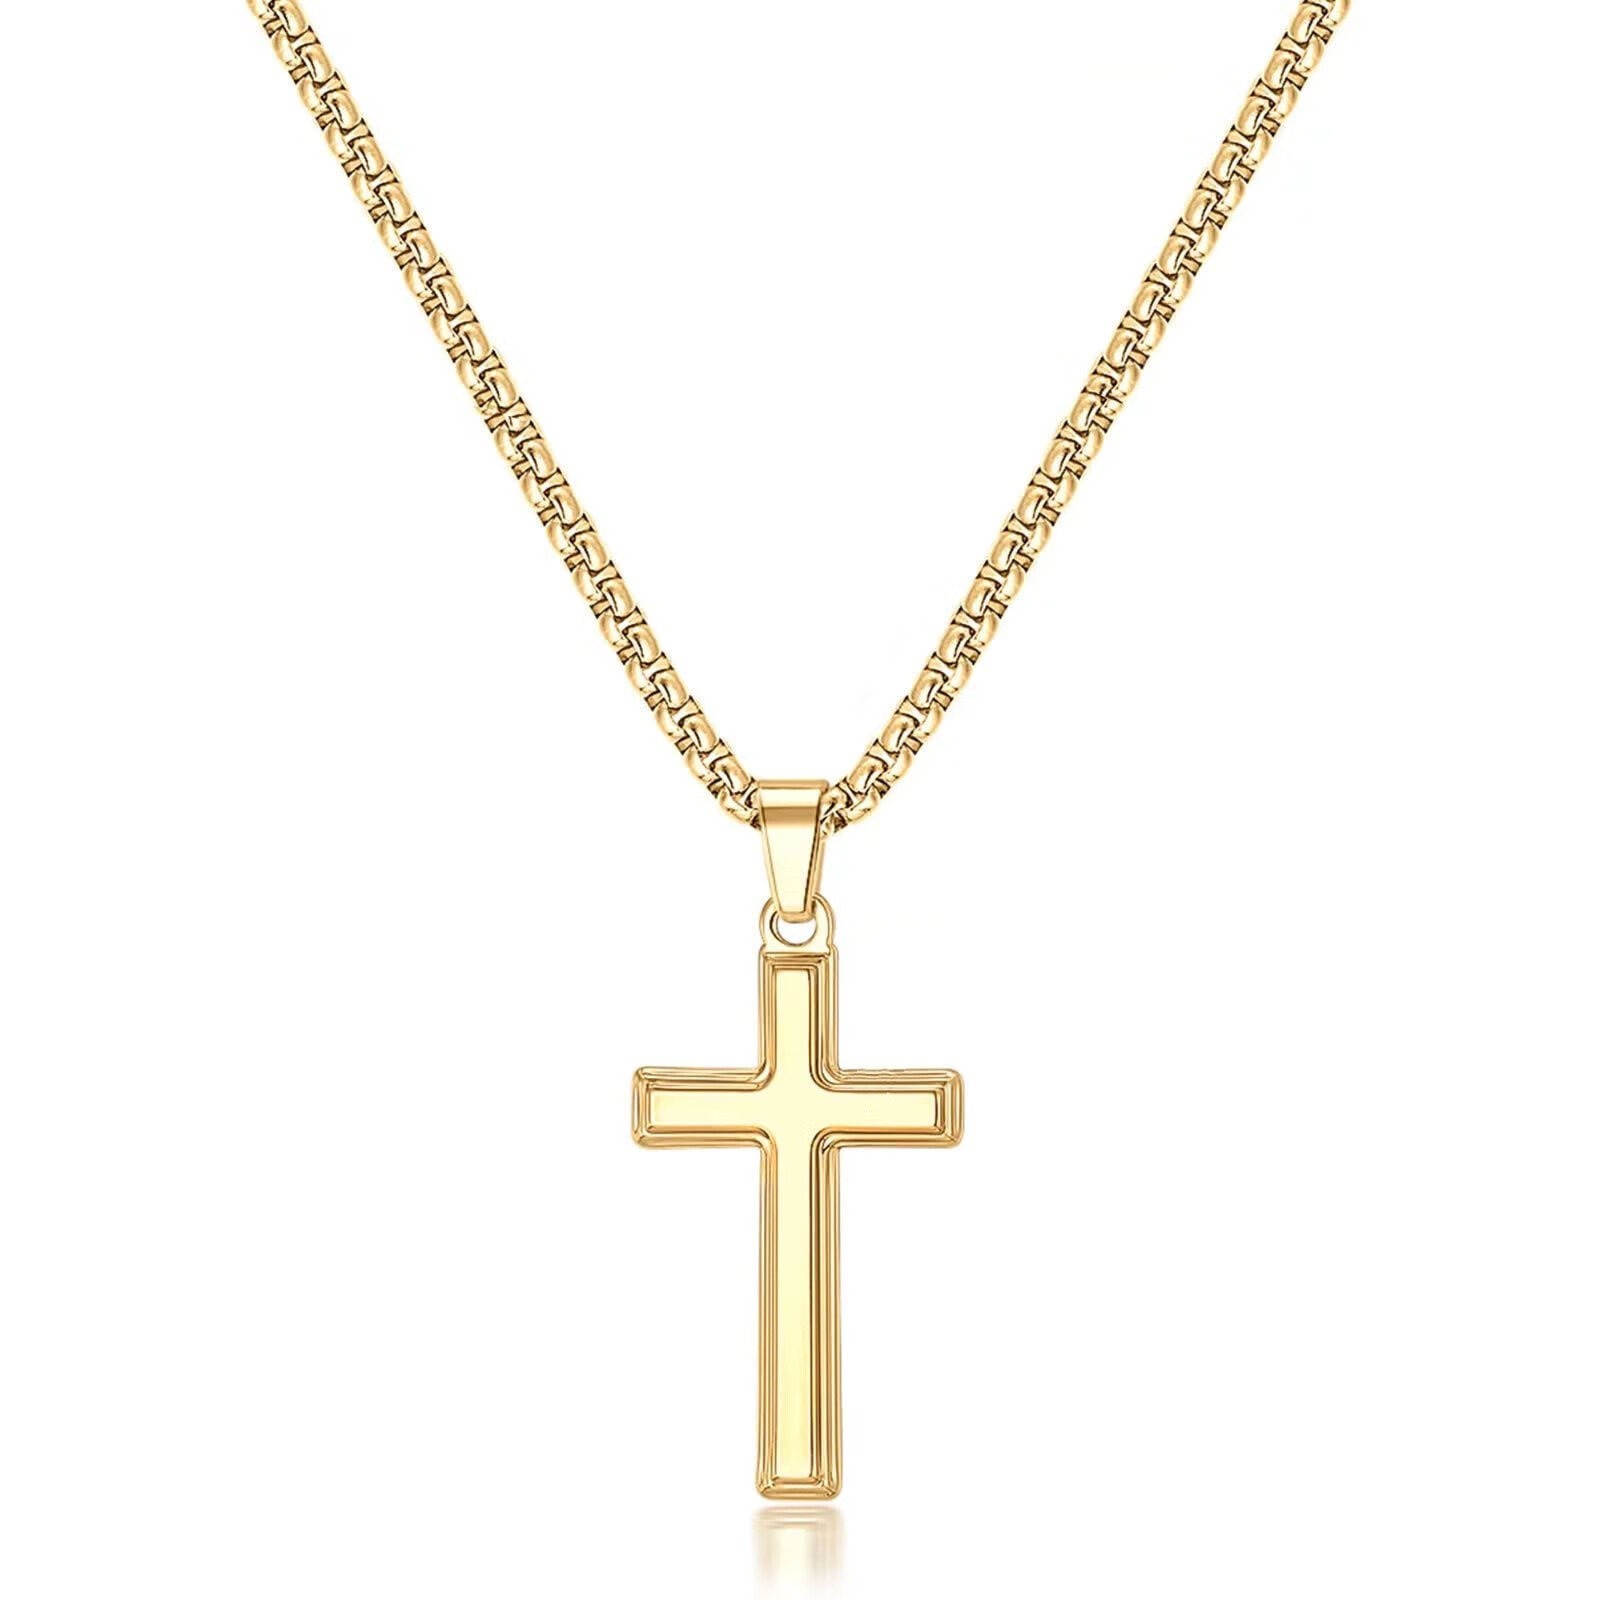 SISGEM 18k Gold Box Chain and Cross Pendant Necklace for Women, Small  Religious Jewelry Christmas Gifts for Her, 18 Inch レディースアクセサリー